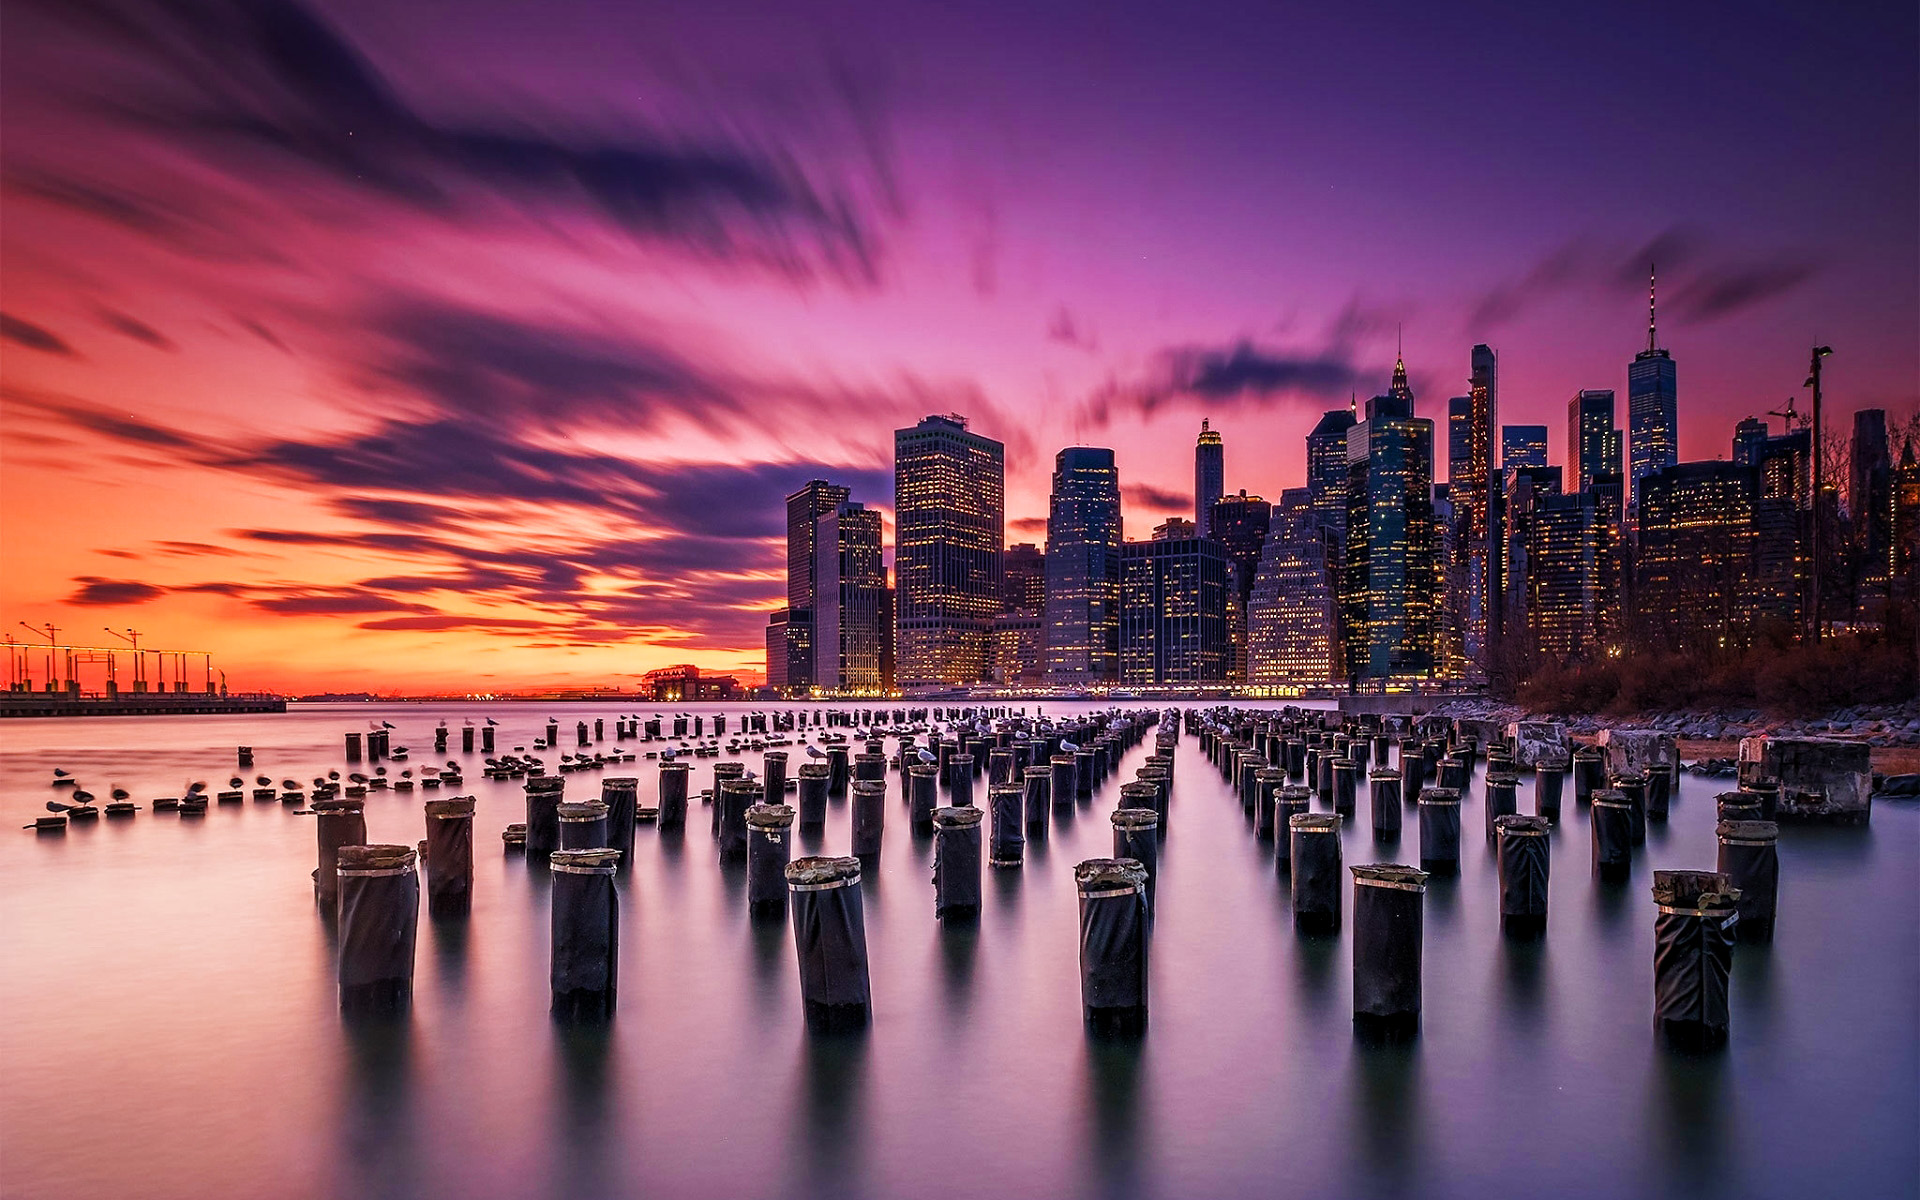 Download wallpaper New York, old pier, sunset, american cities, NYC, USA, America, New York in evening for desktop with resolution 1920x1200. High Quality HD picture wallpaper